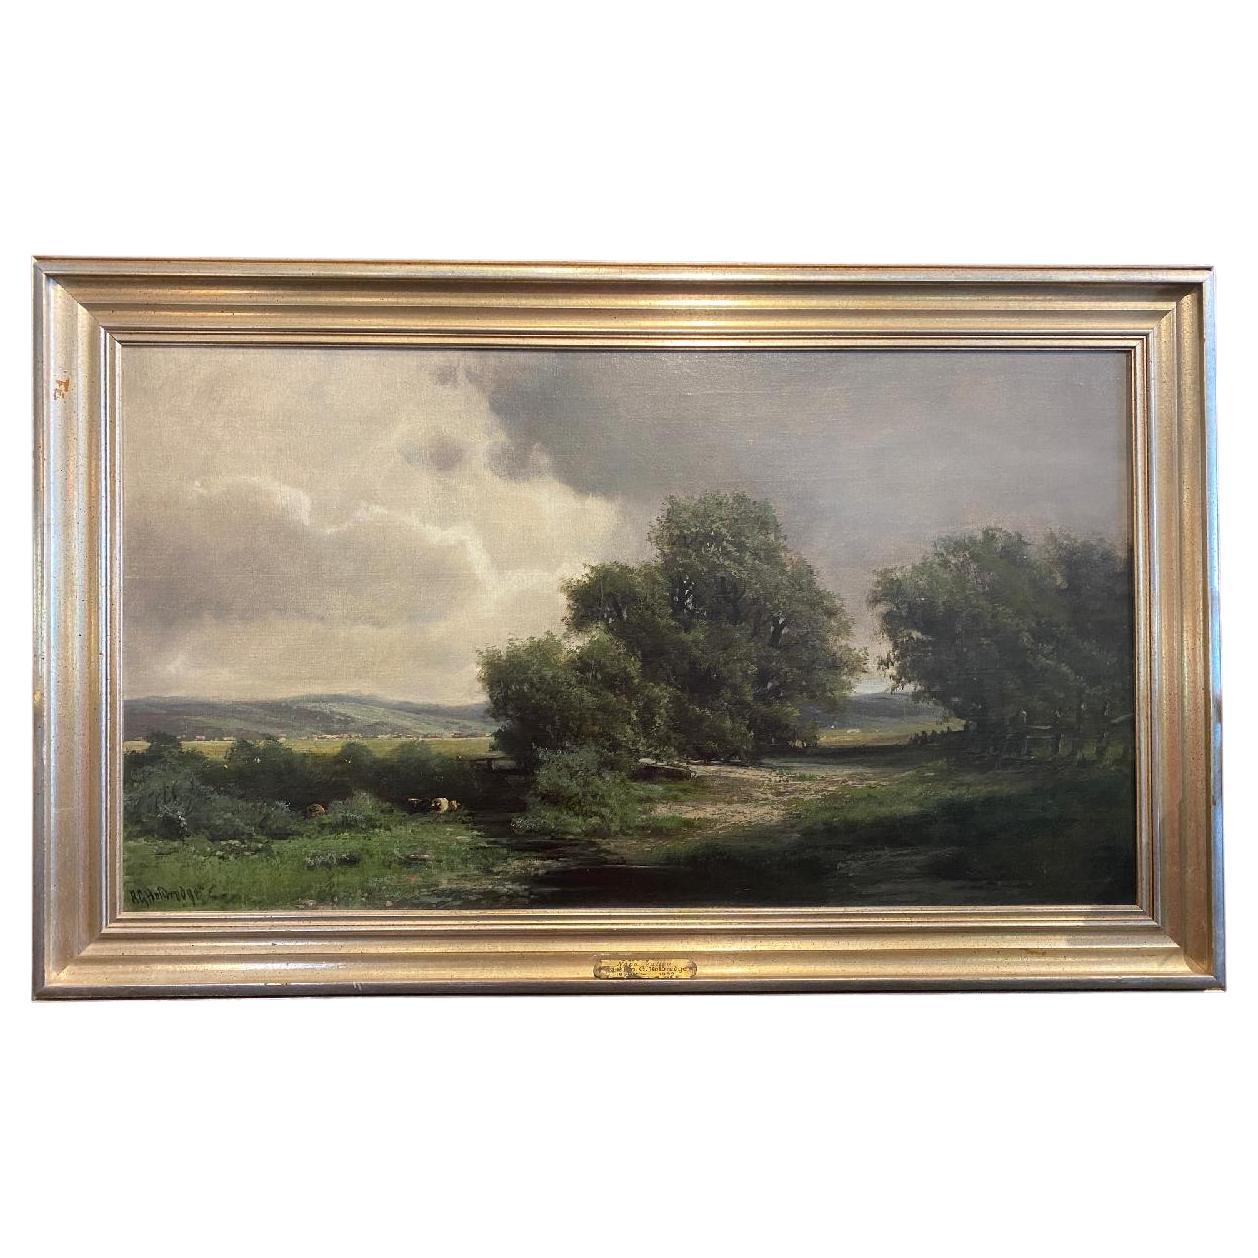 Large 19th Century Signed Oil on Board Painting of Napa Valley by R.G. Holdredge